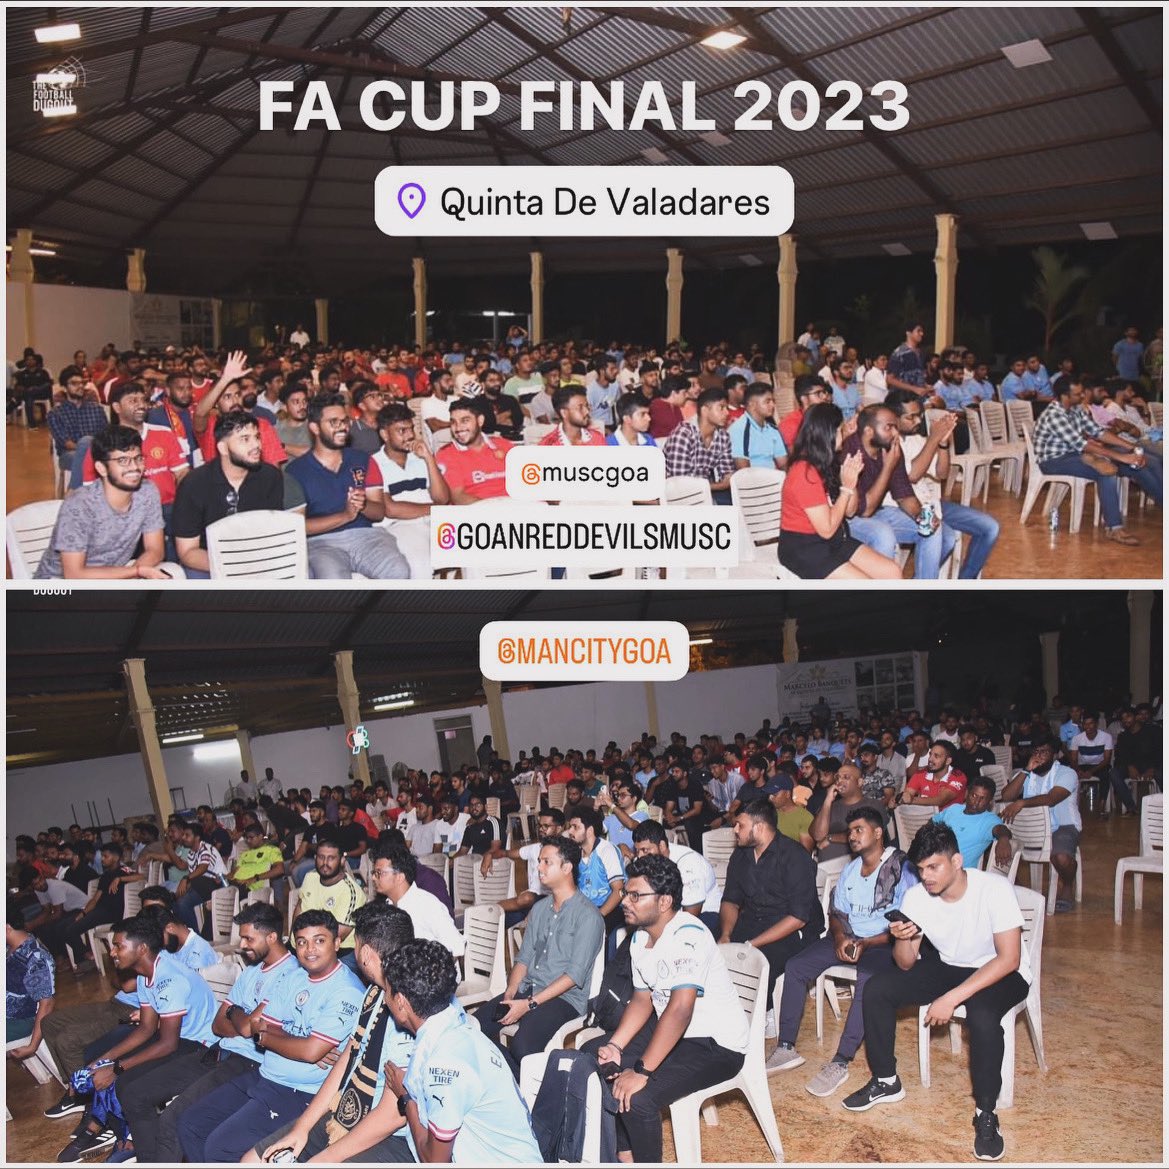 #ThrowbackTuesday - Last Seasons FA Cup Final saw Manchester City pick up a 2-1 win over Manchester United in a stadium like atmosphere Screening between @ManCityGoa & @GoanMusc @MUSCGoa 🔥 

Who will win it in 2024? 🏆 #MCIMUN #ManchesterDerby #FACupFinal #EmiratesFACup #Goa